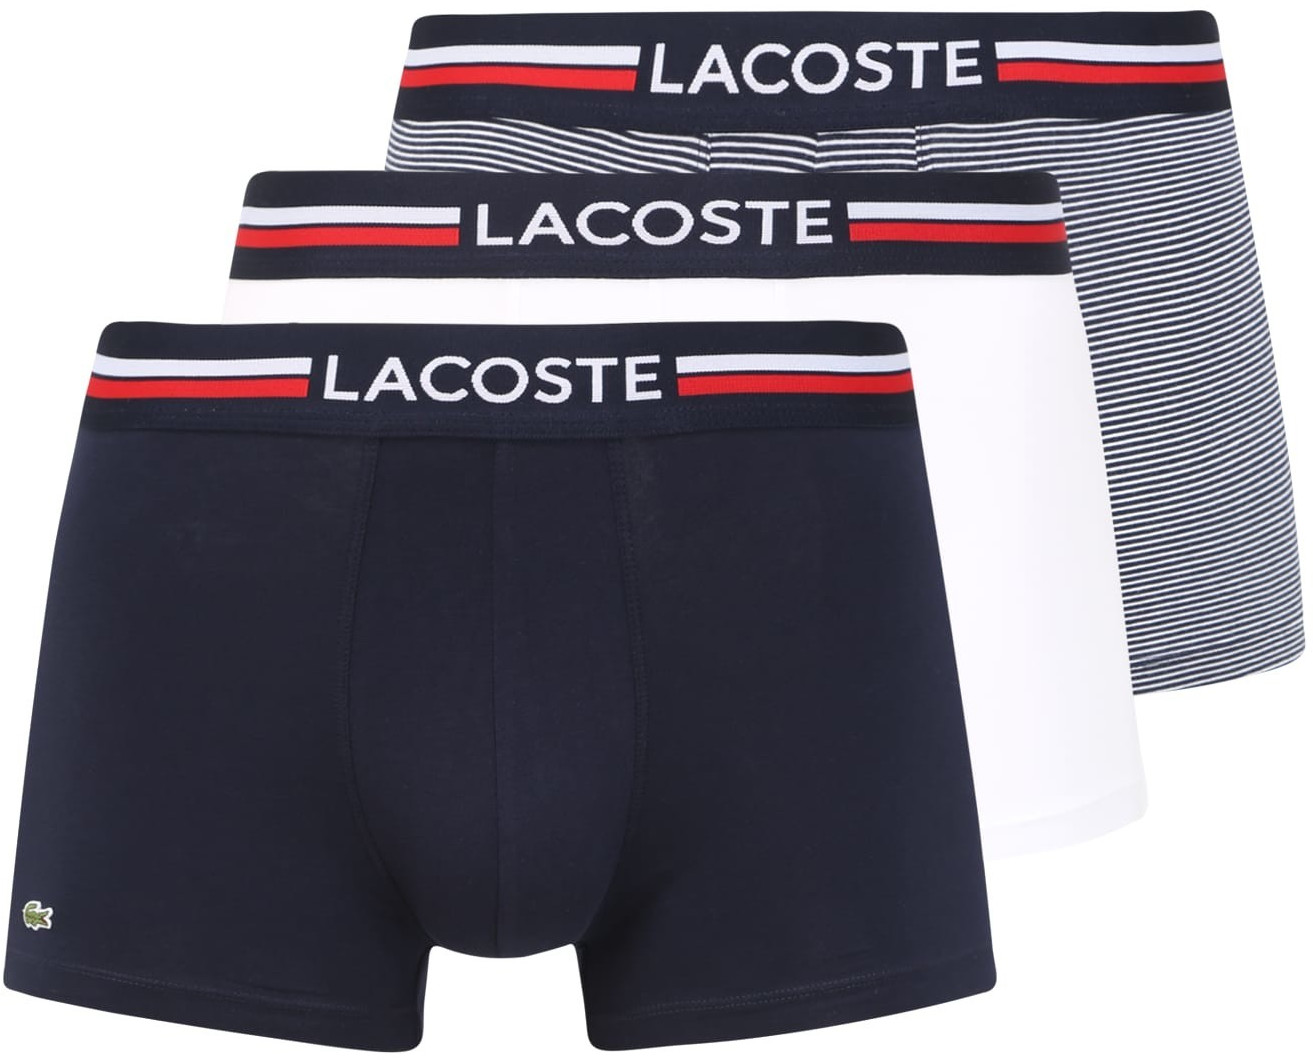 Buy Lacoste 3- Pack Trunks (5H3413) from £24.99 (Today) – Best